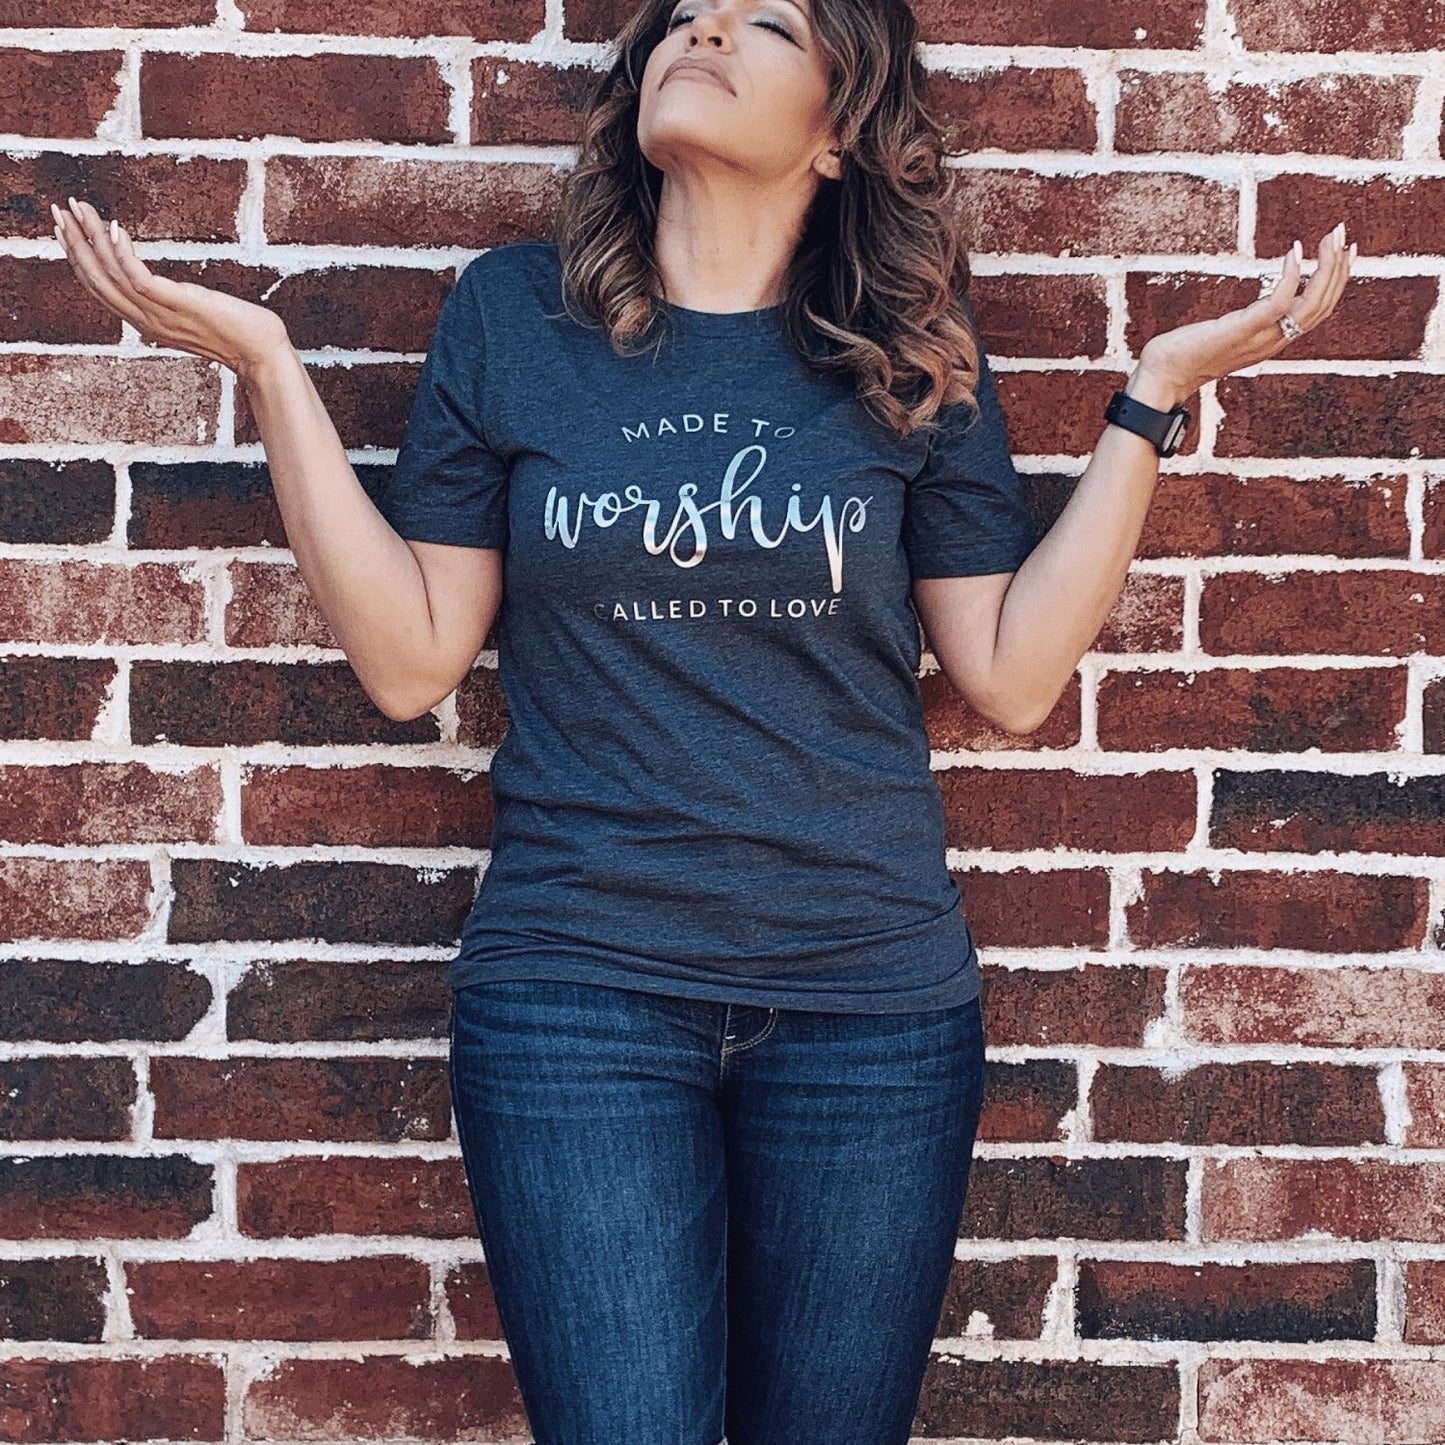 Made To Worship Called To Love Tee - Thistleberry Brand Boutique